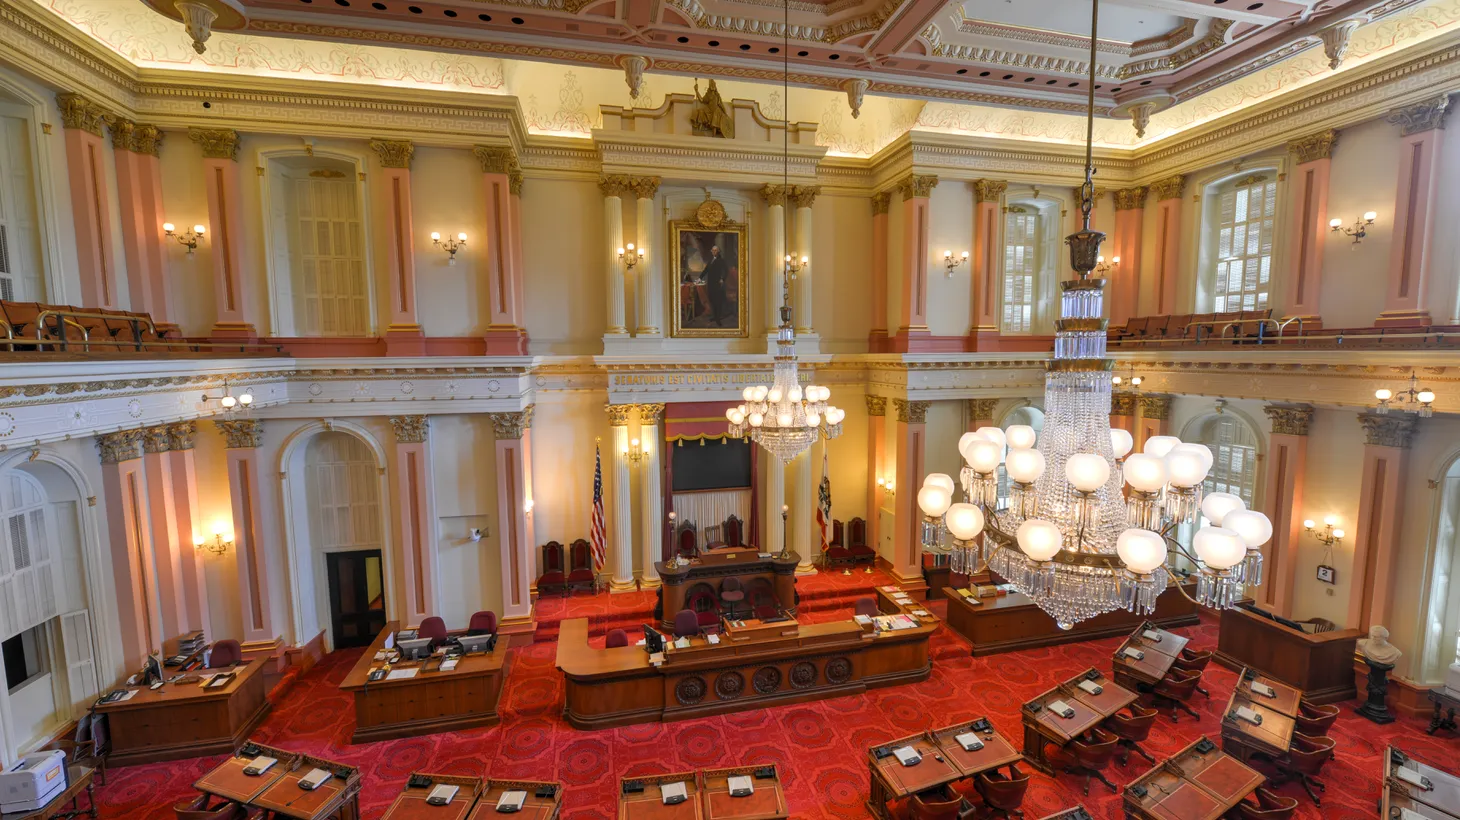 An empty Senate chamber in the California State Capitol building is seen on May 31, 2014. “Politics can be toxic enough as it is, and then you throw on the threats and the potential violence? It's no wonder that some people decide to take a pass, and that again is really bad for democracy,” says California State Senator Scott Weiner.